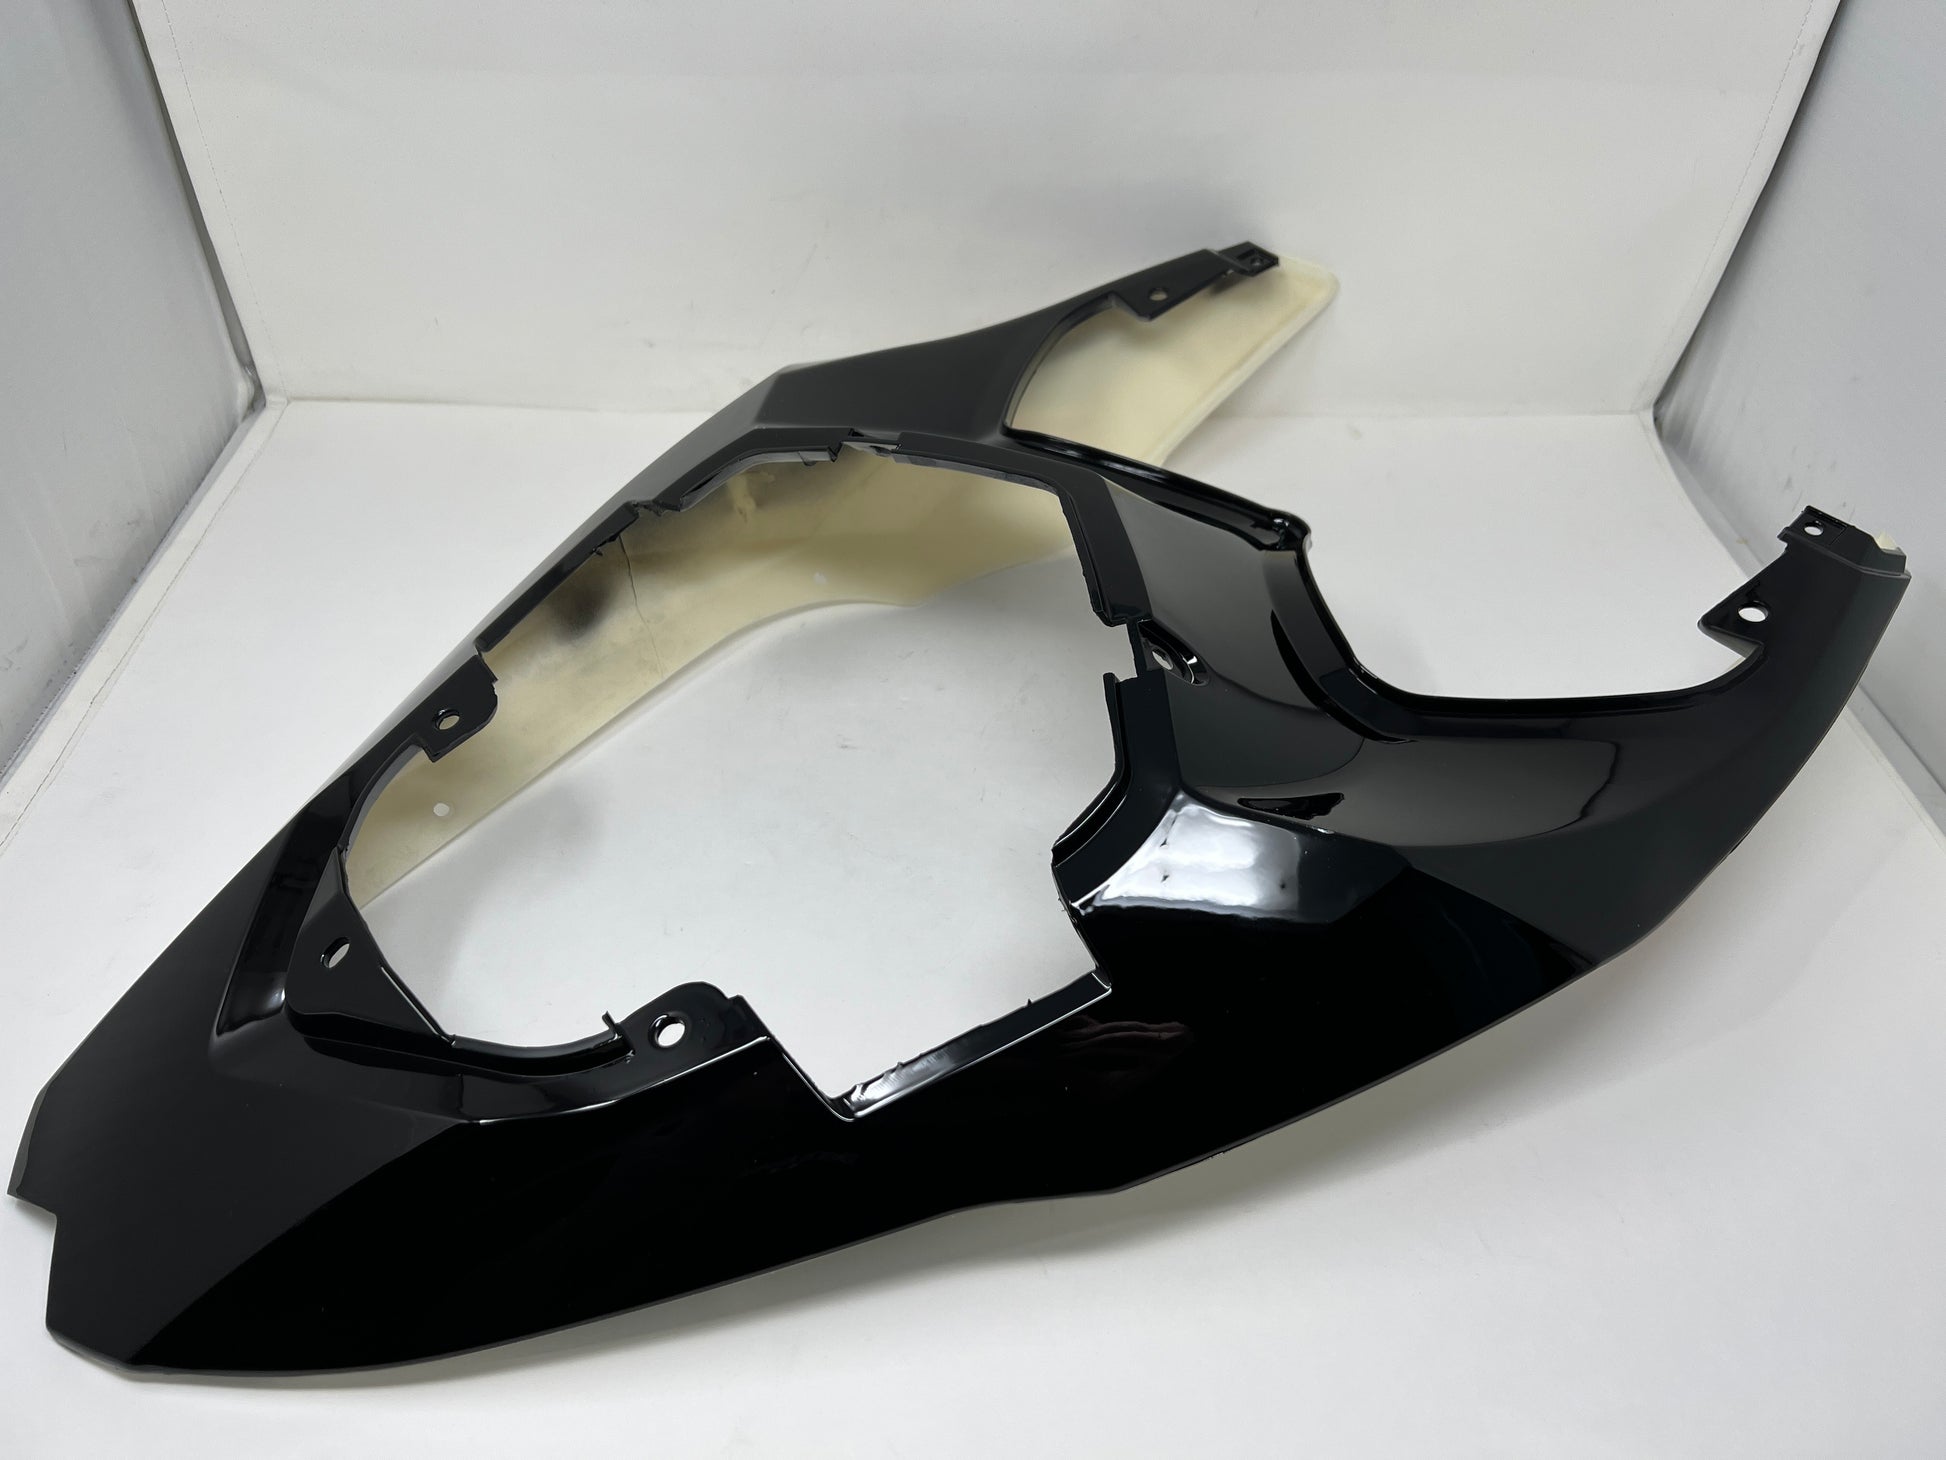 DF250RTS tail fairing for sale. Buy dongfang fairings tail fairing